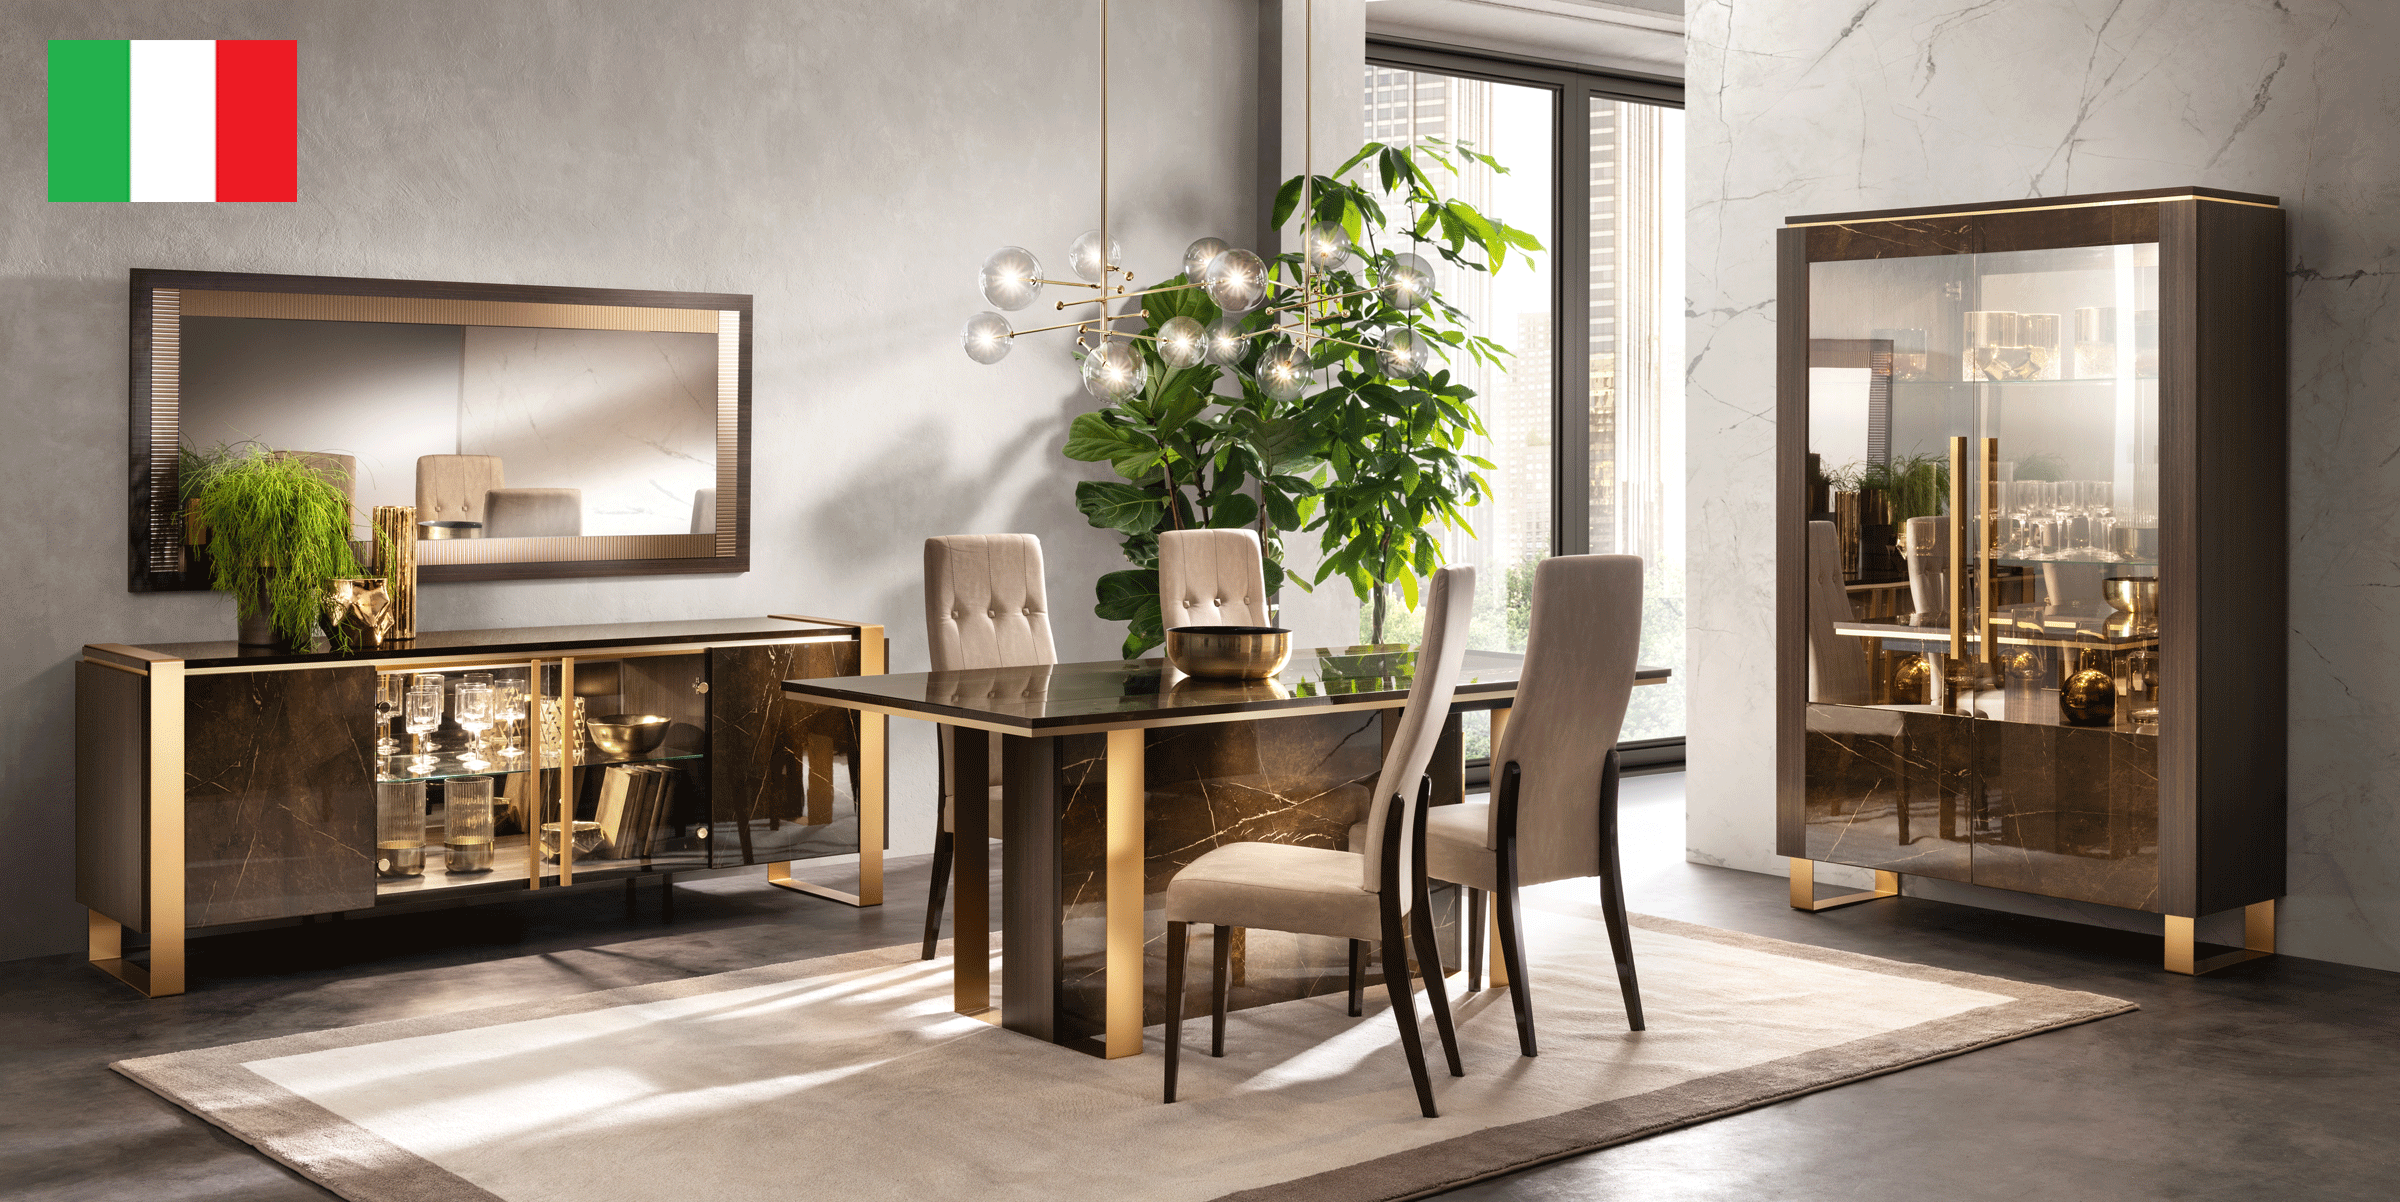 Dining Room Furniture Marble-Look Tables Essenza Dining by Arredoclassic, Italy